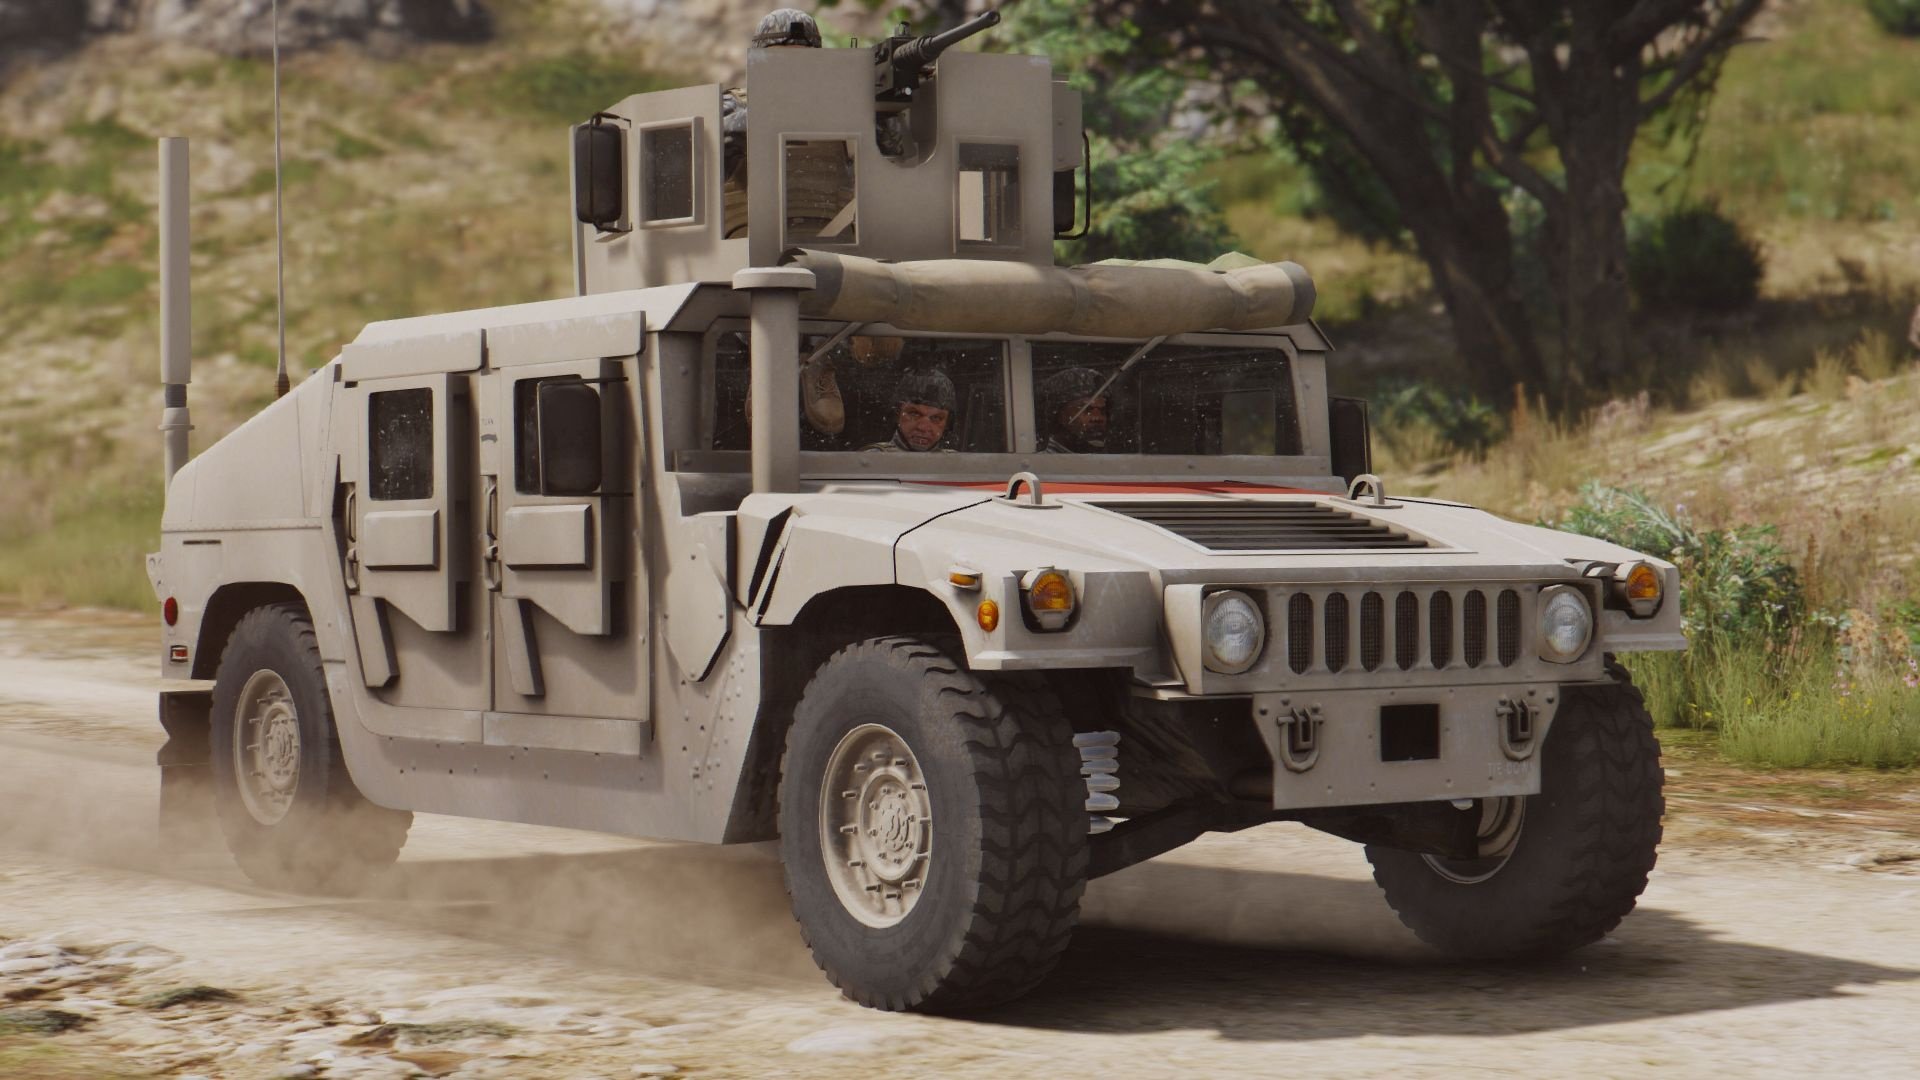 Ground Military Vehicles Pack [Add-On] - GTA5-Mods.com